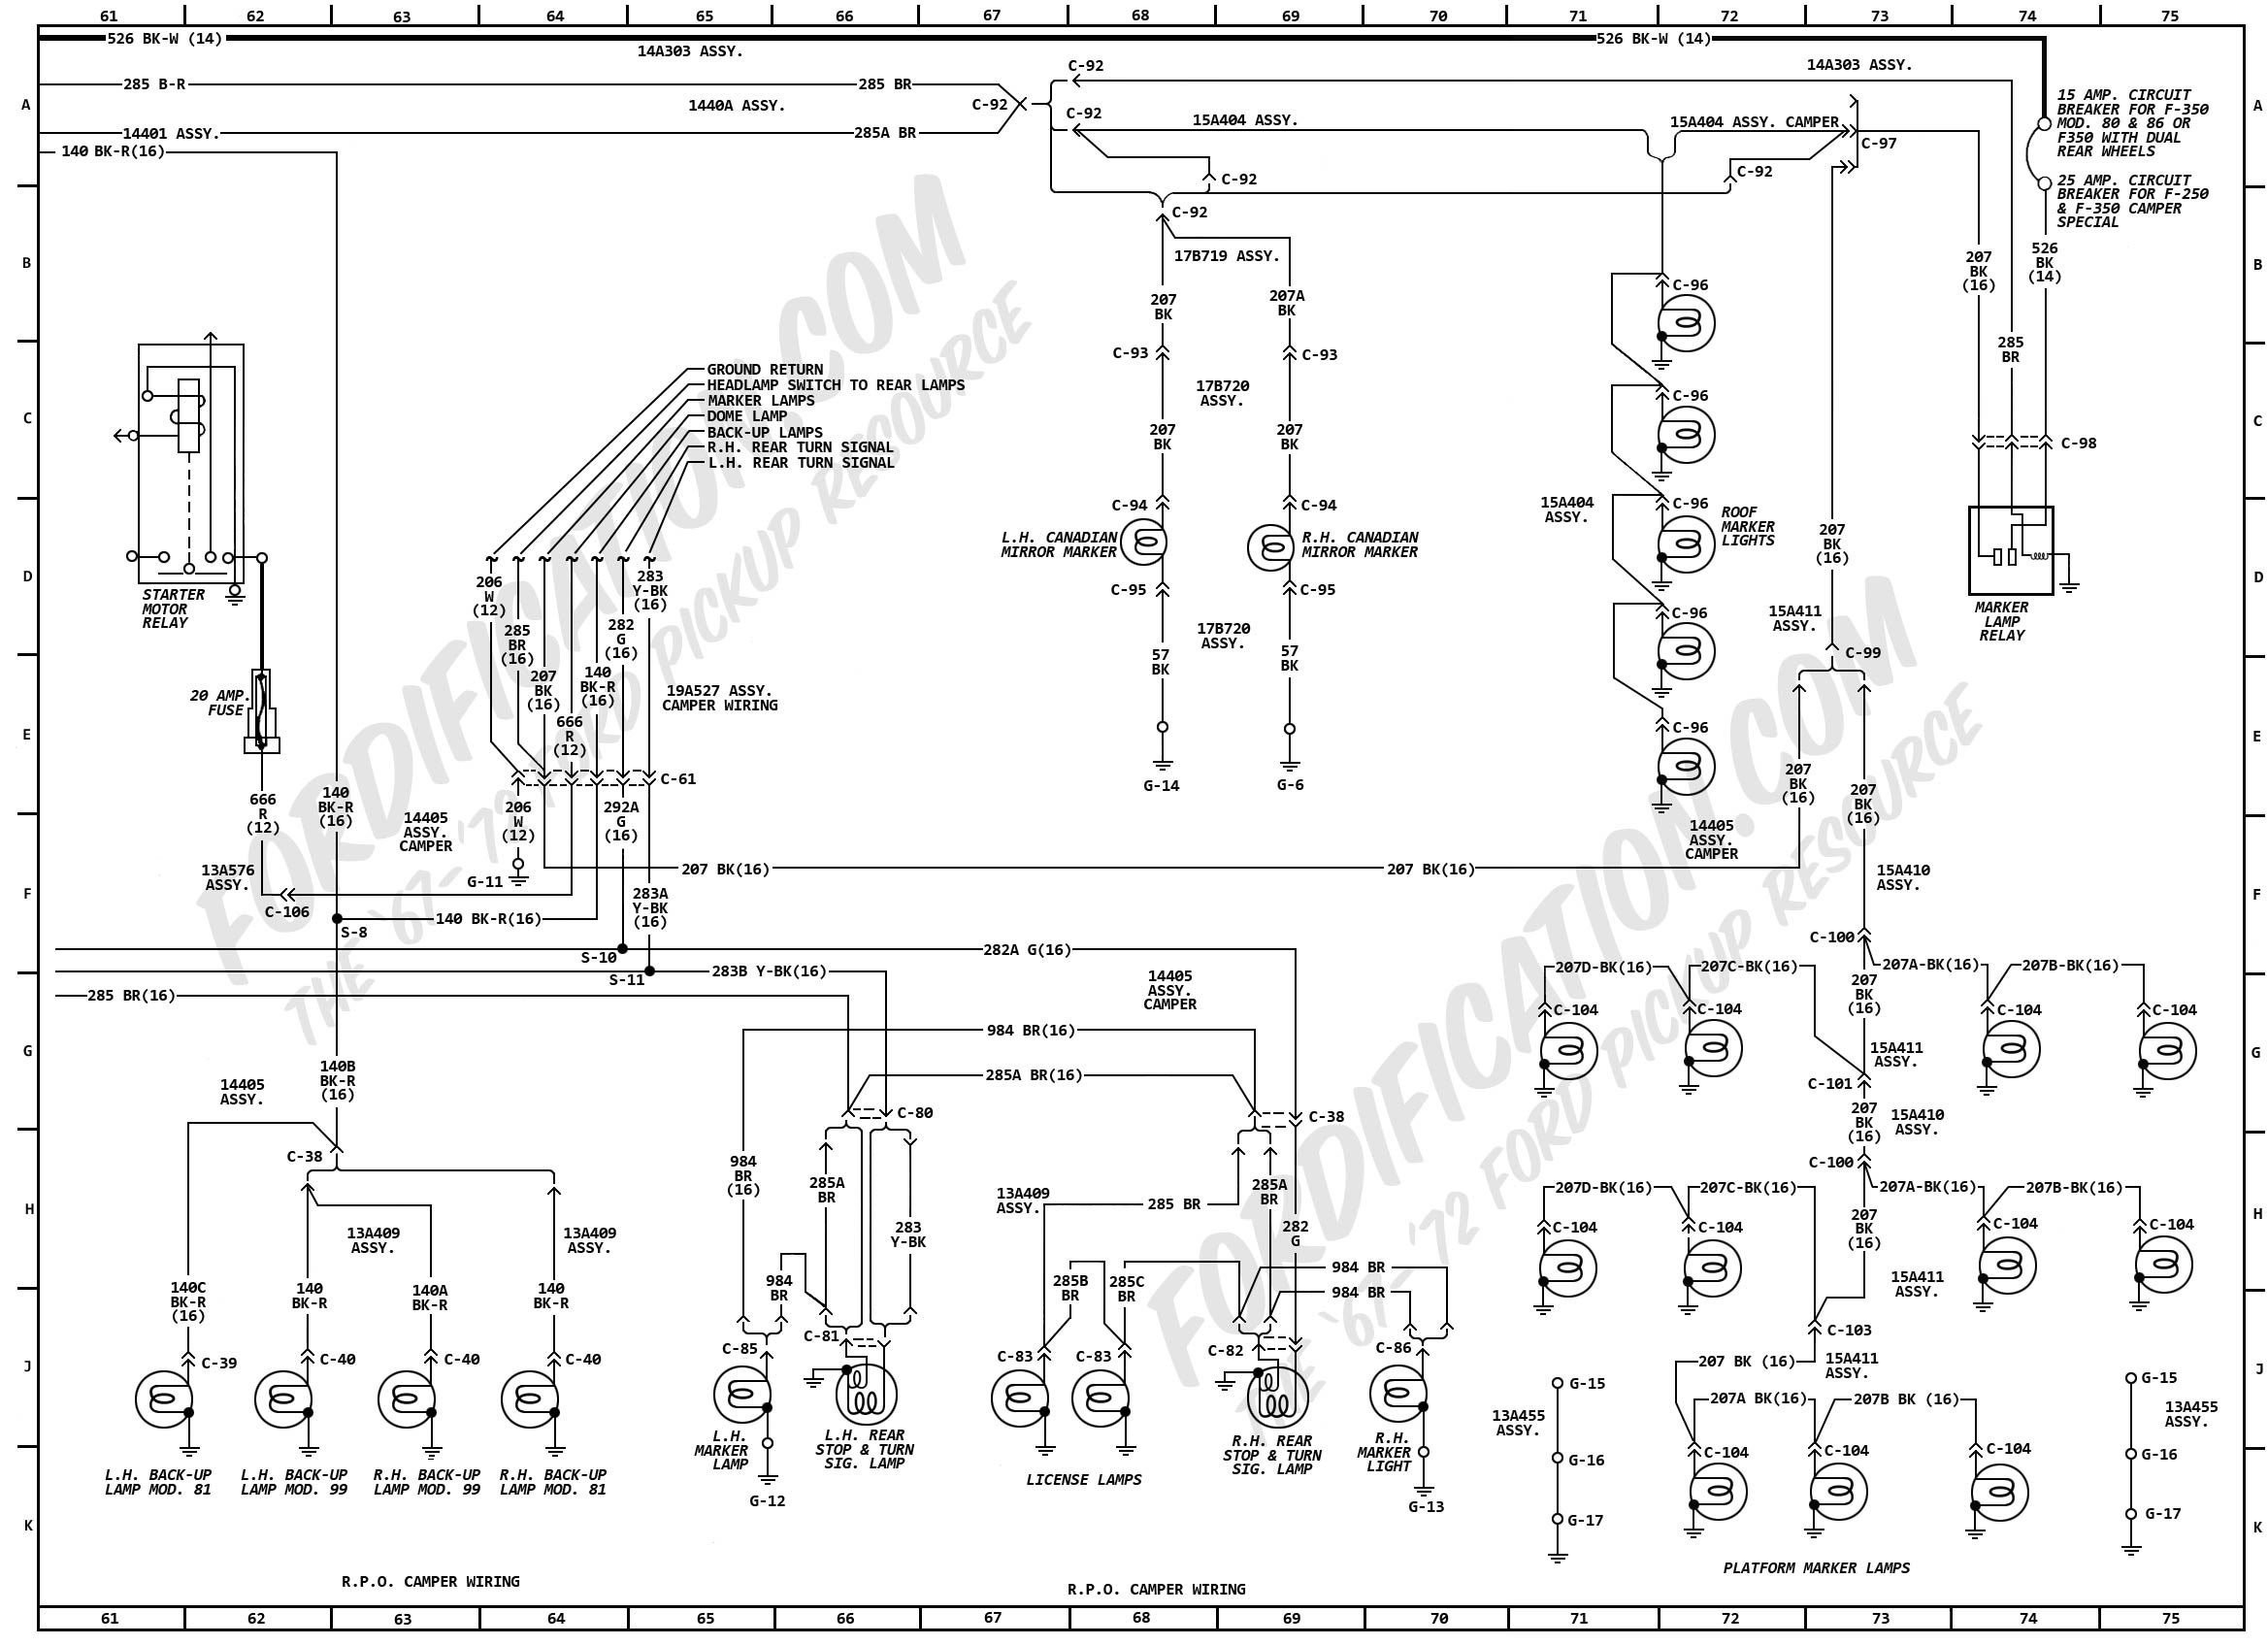 Free Ford Wiring Diagram from www.fordification.com